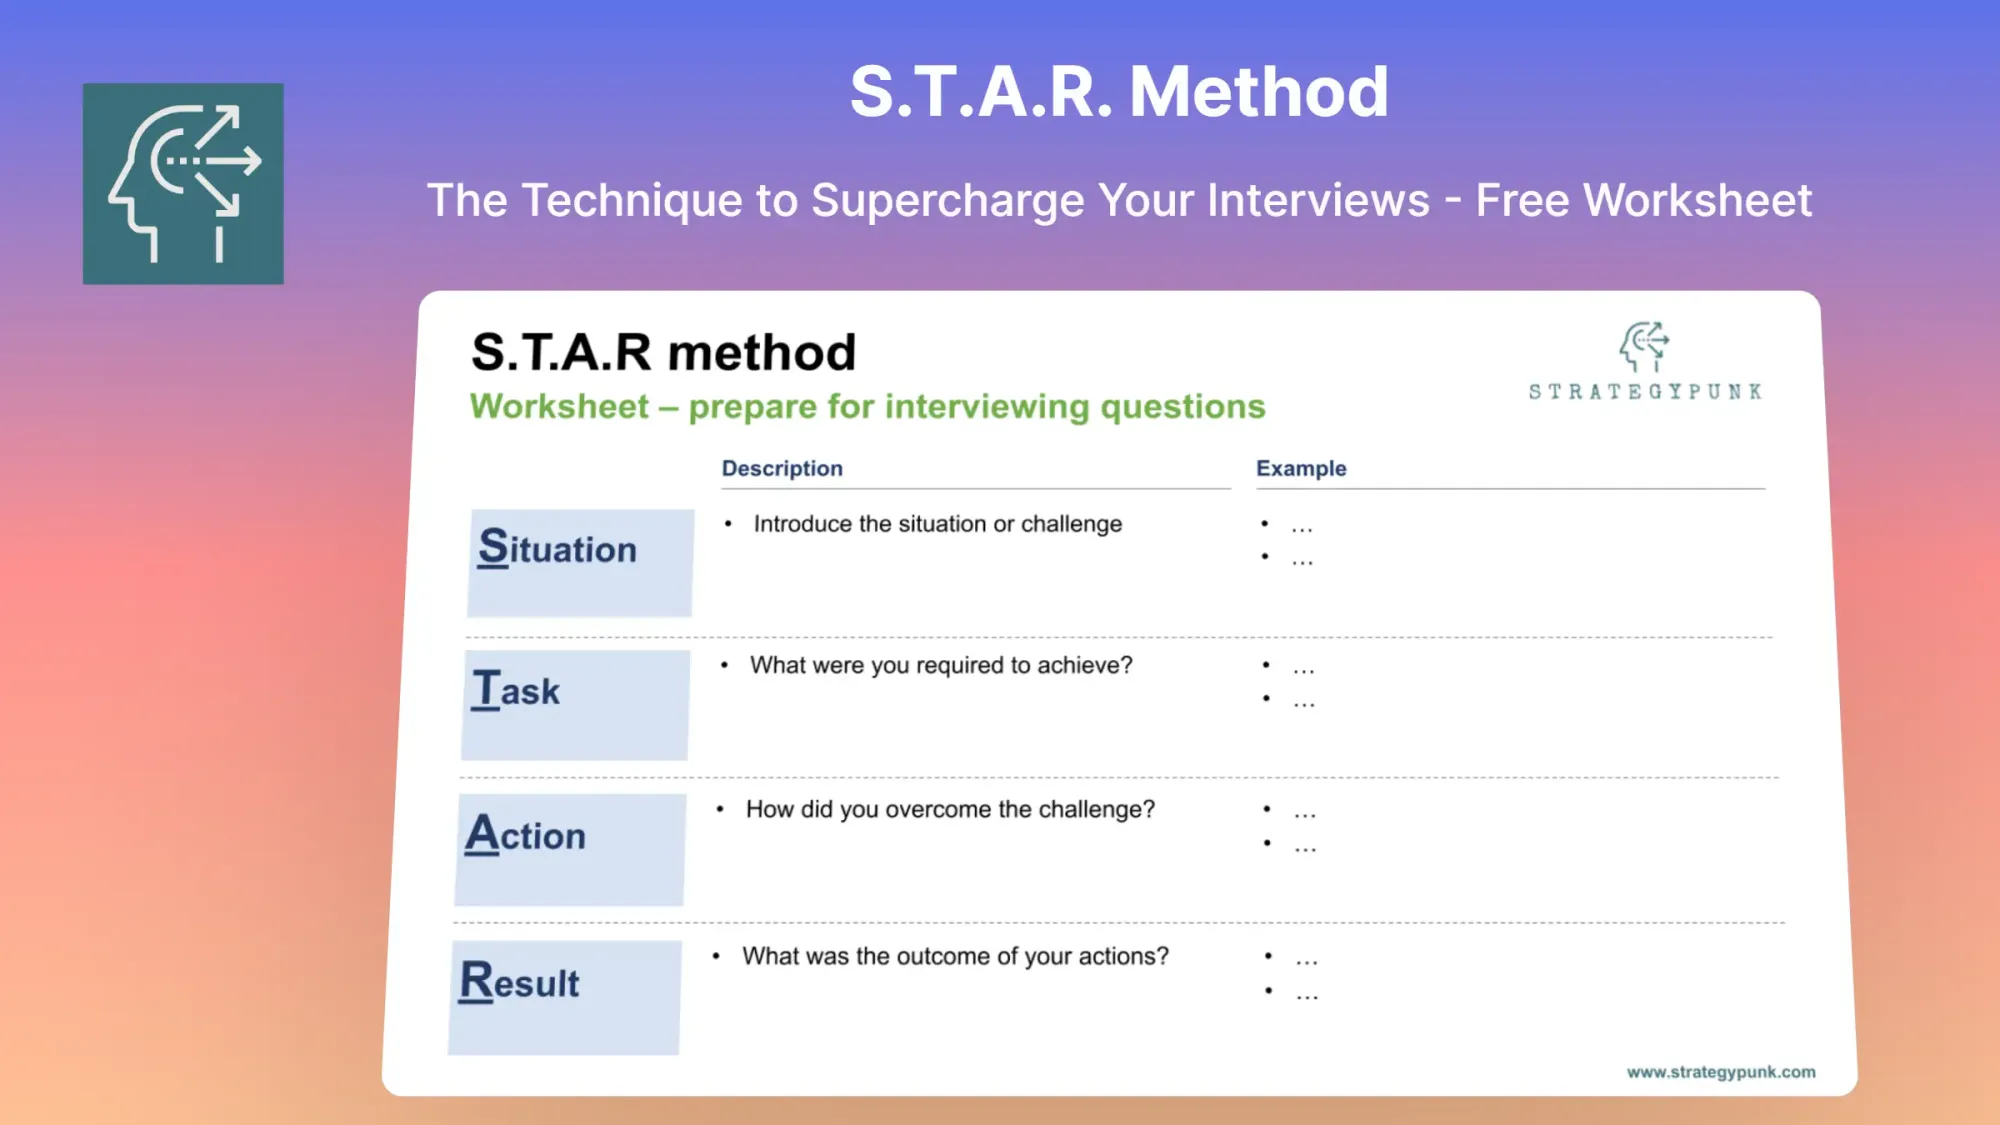 STAR Method: The Technique to Supercharge Your Interviews (Free Template)